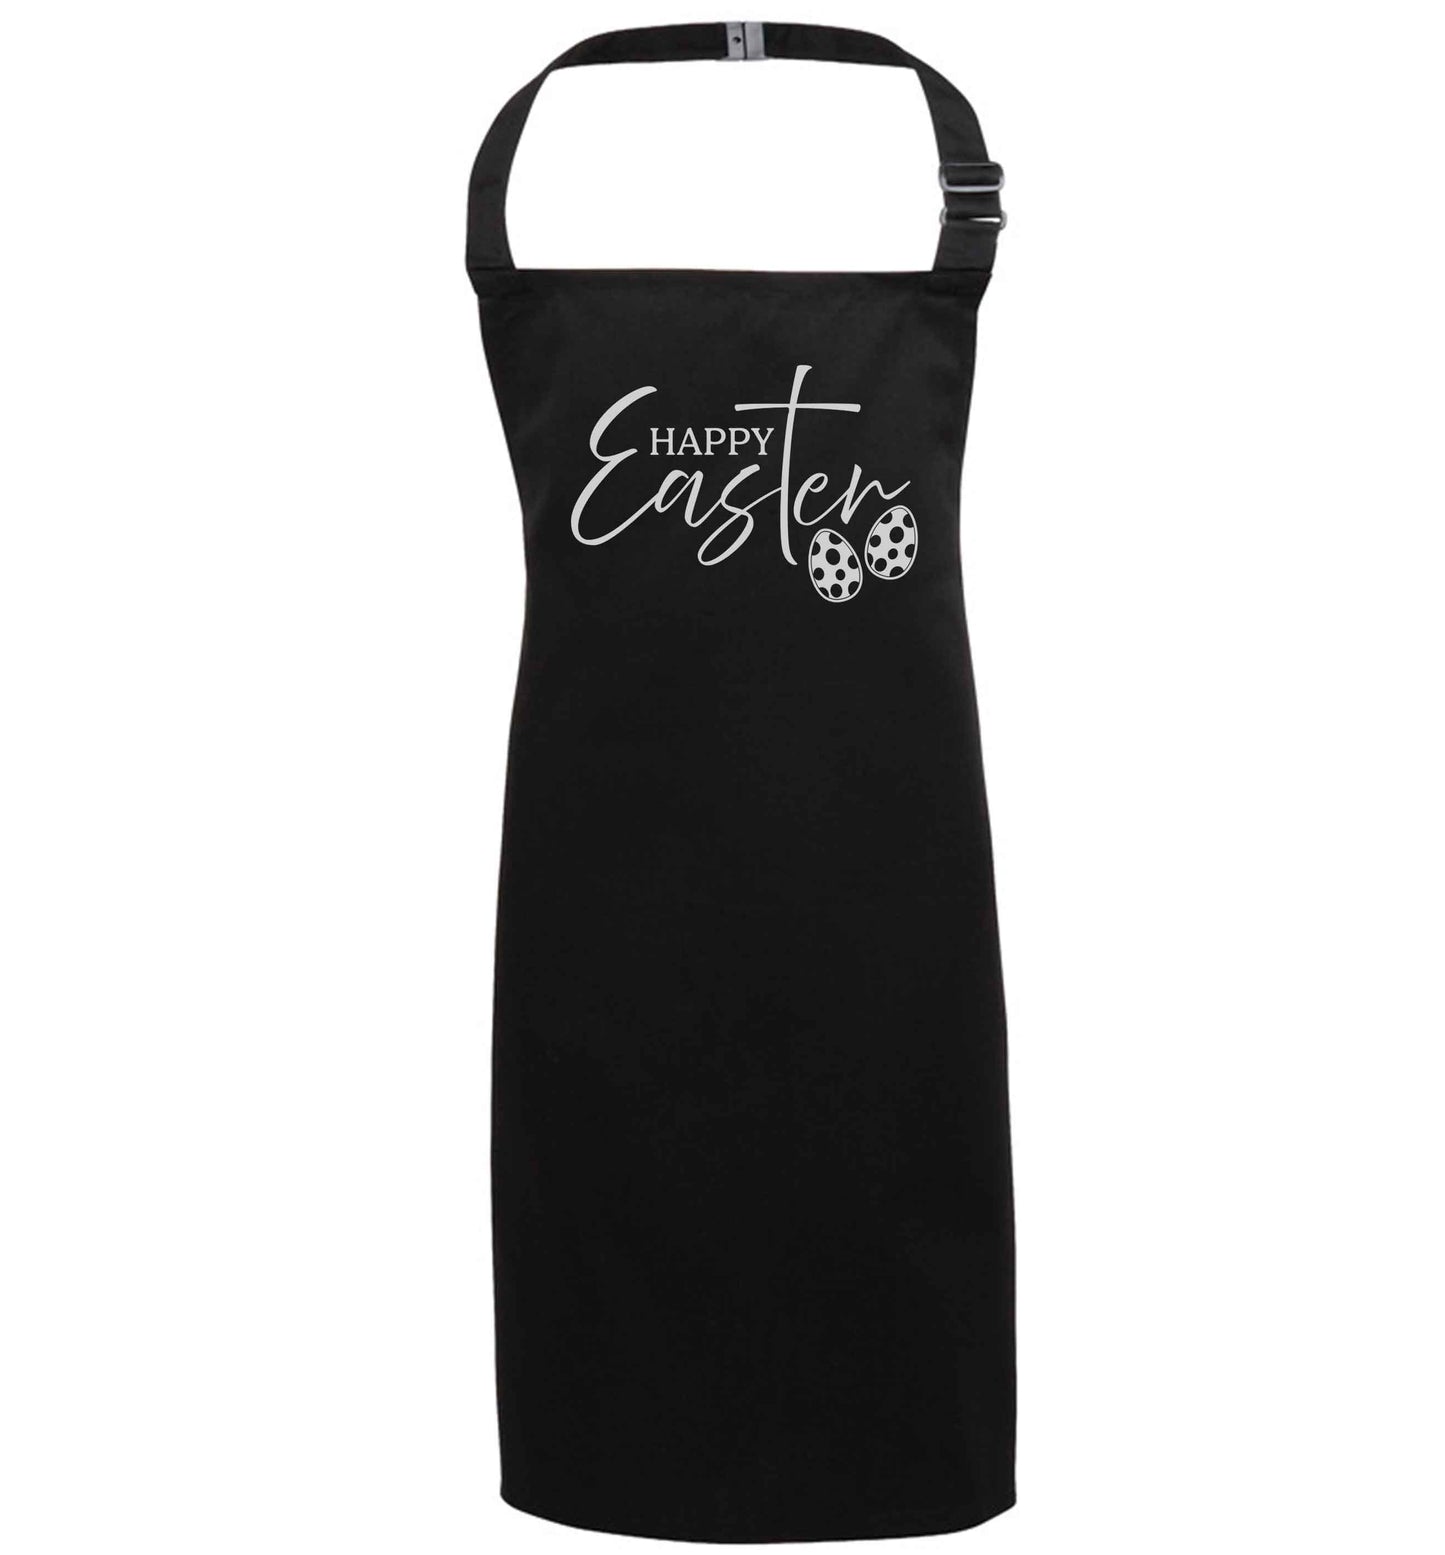 Happy Easter black apron 7-10 years